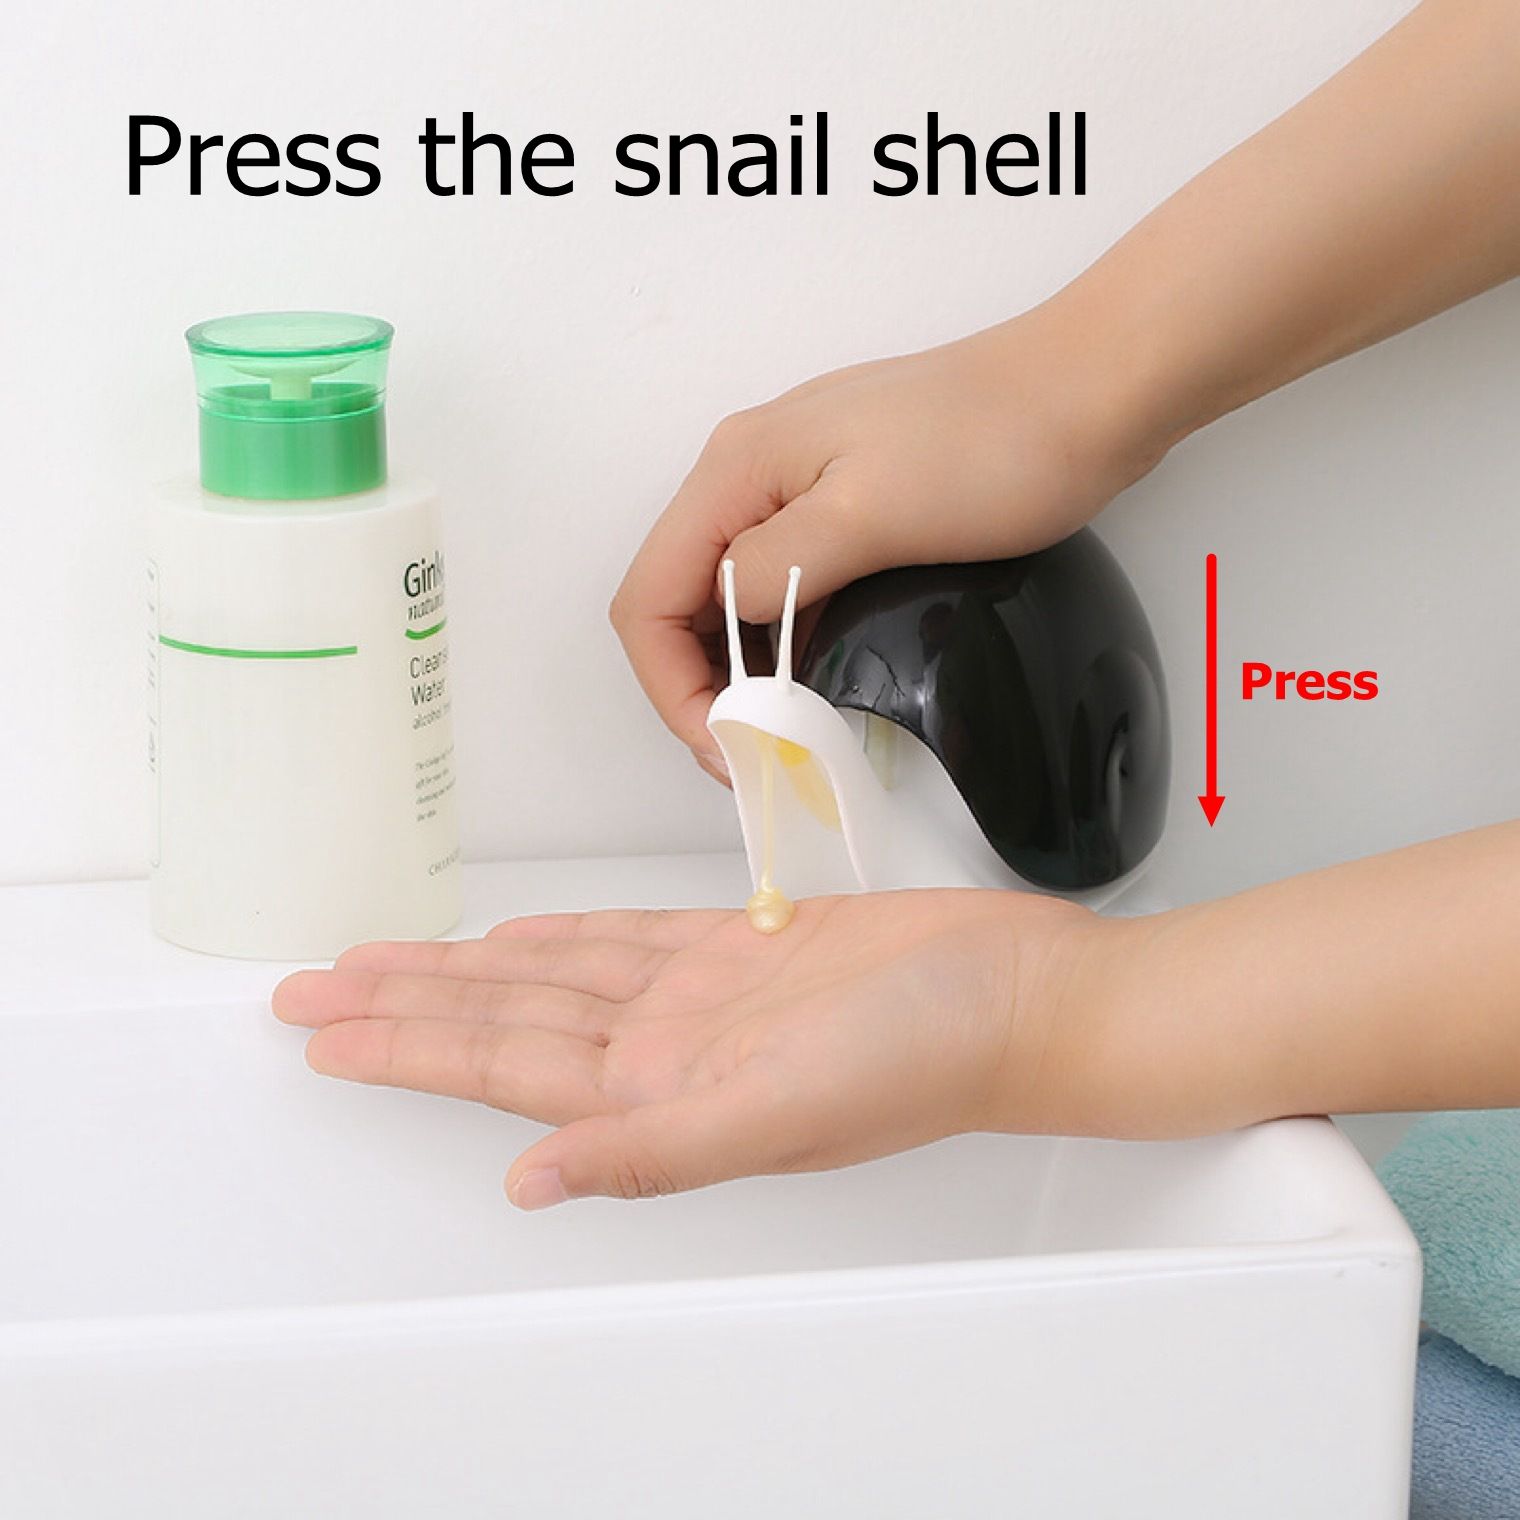 250ML-Pump-Soap-Dispenser-Manually-Pressed-Creative-Type-For-Bathroom-Kitchen-1655328